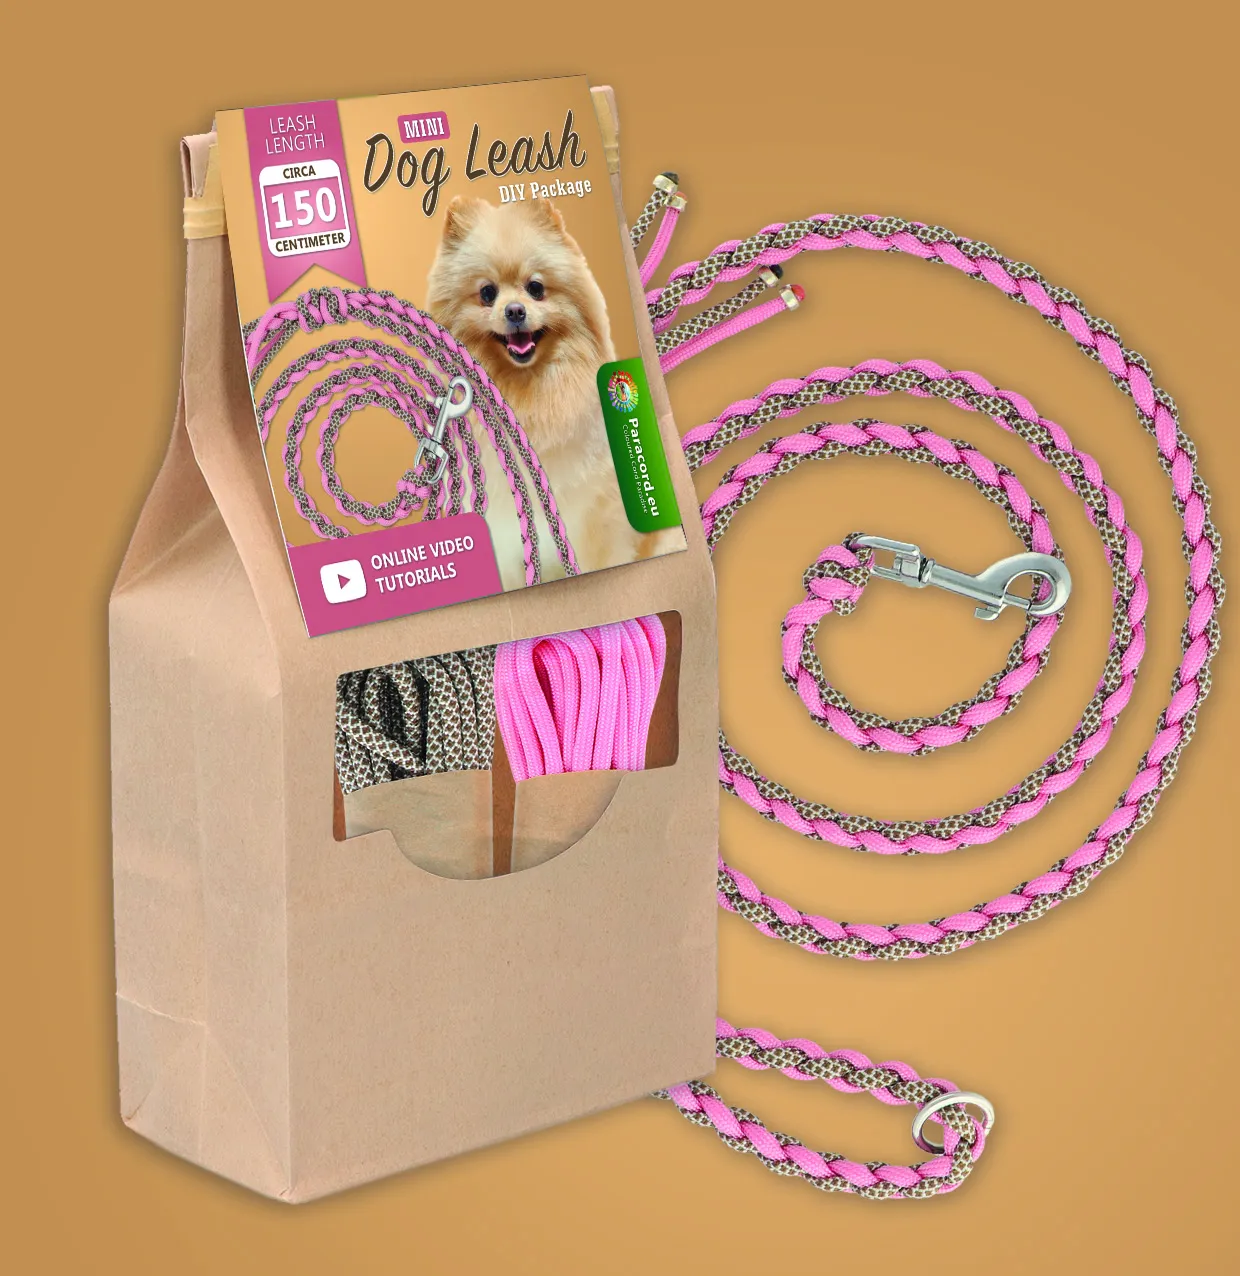 Make your own Dog Leash with Paracord | Small dogs DIY kit